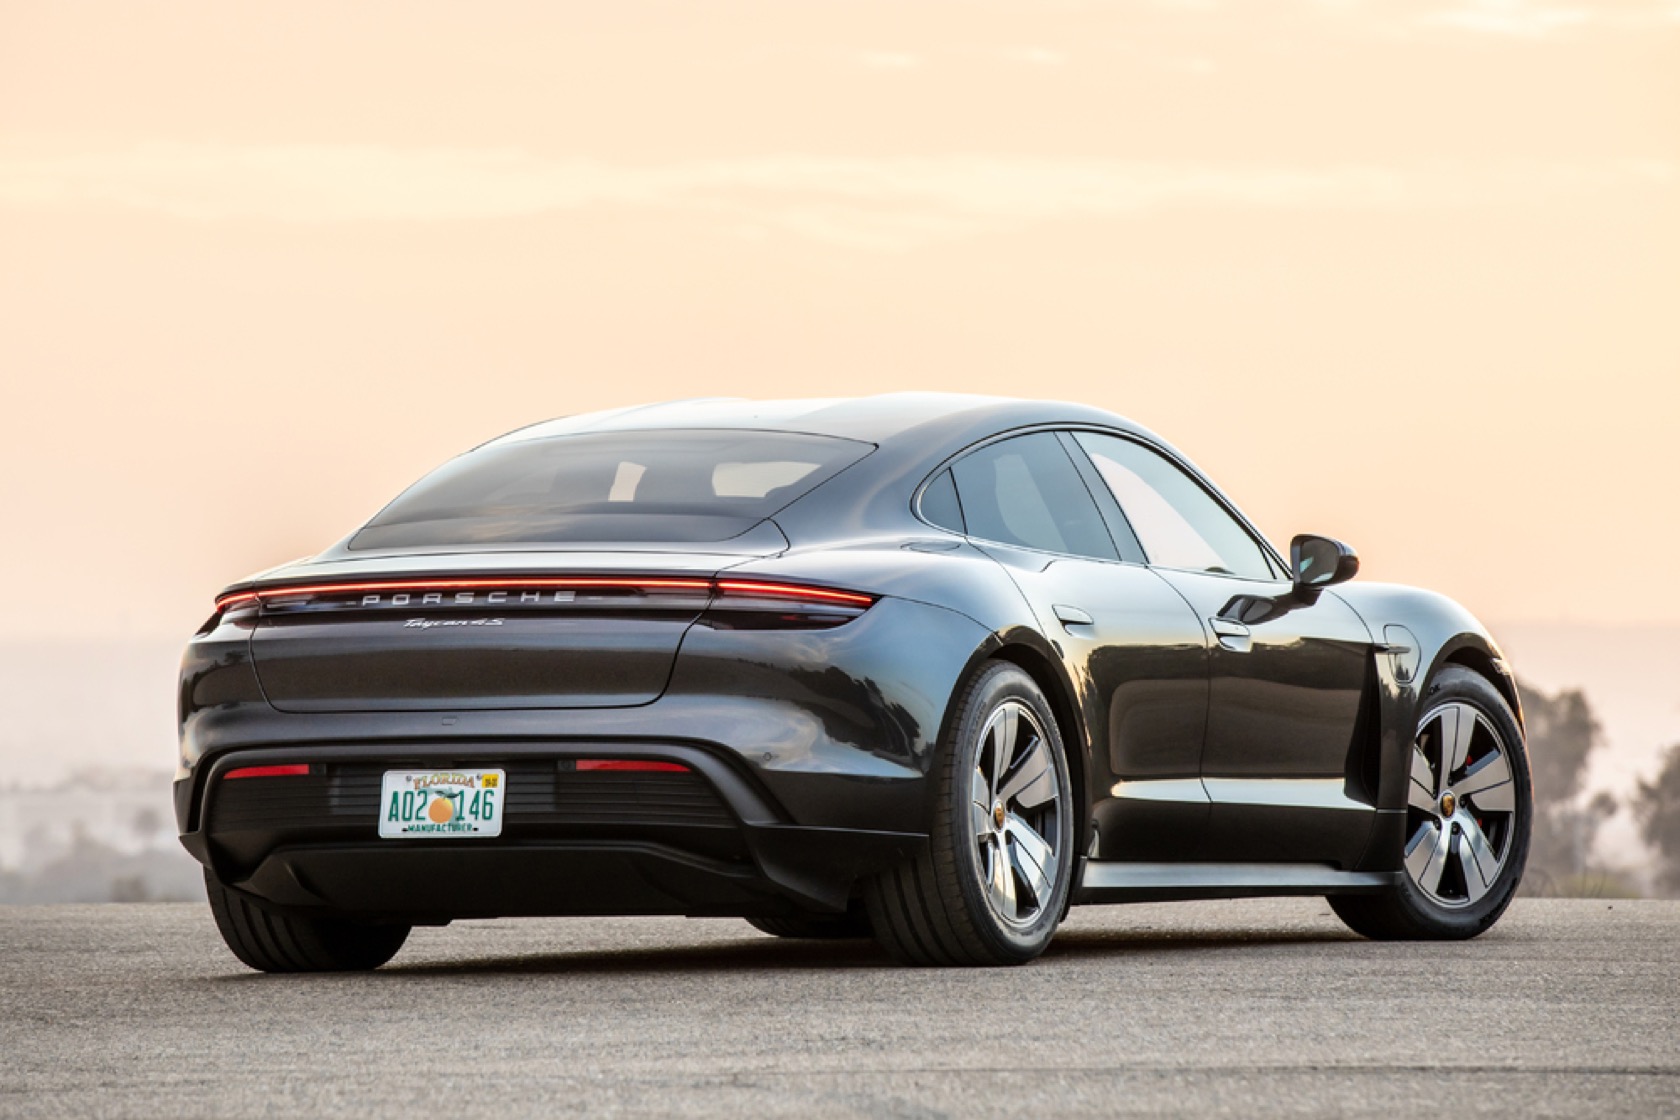 2020 Porsche Taycan 4S arrives in US as more affordable EV [Updated